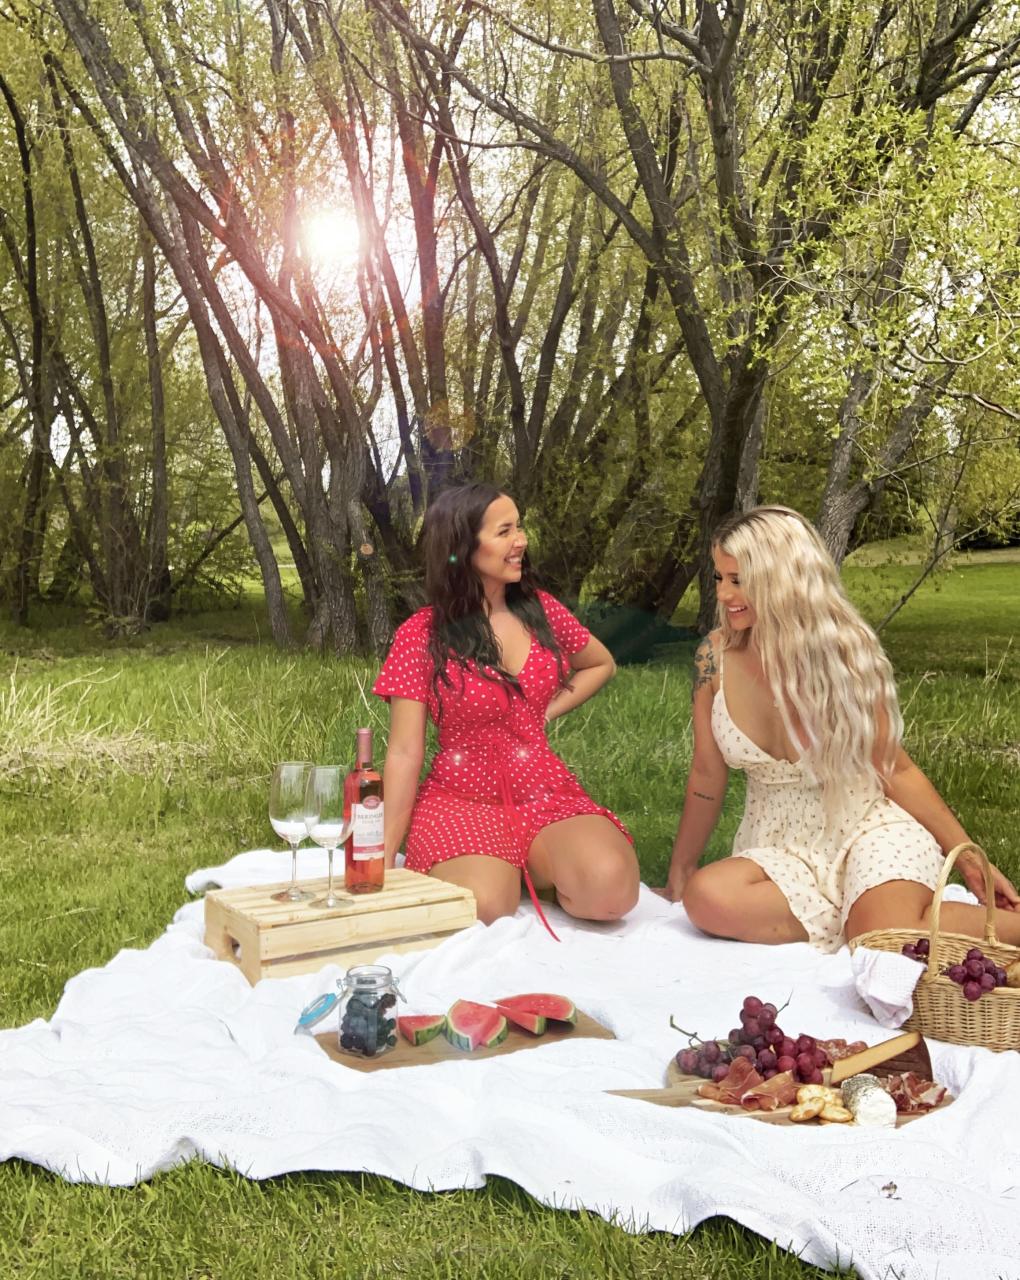 Cute Picnic Ideas With Friends